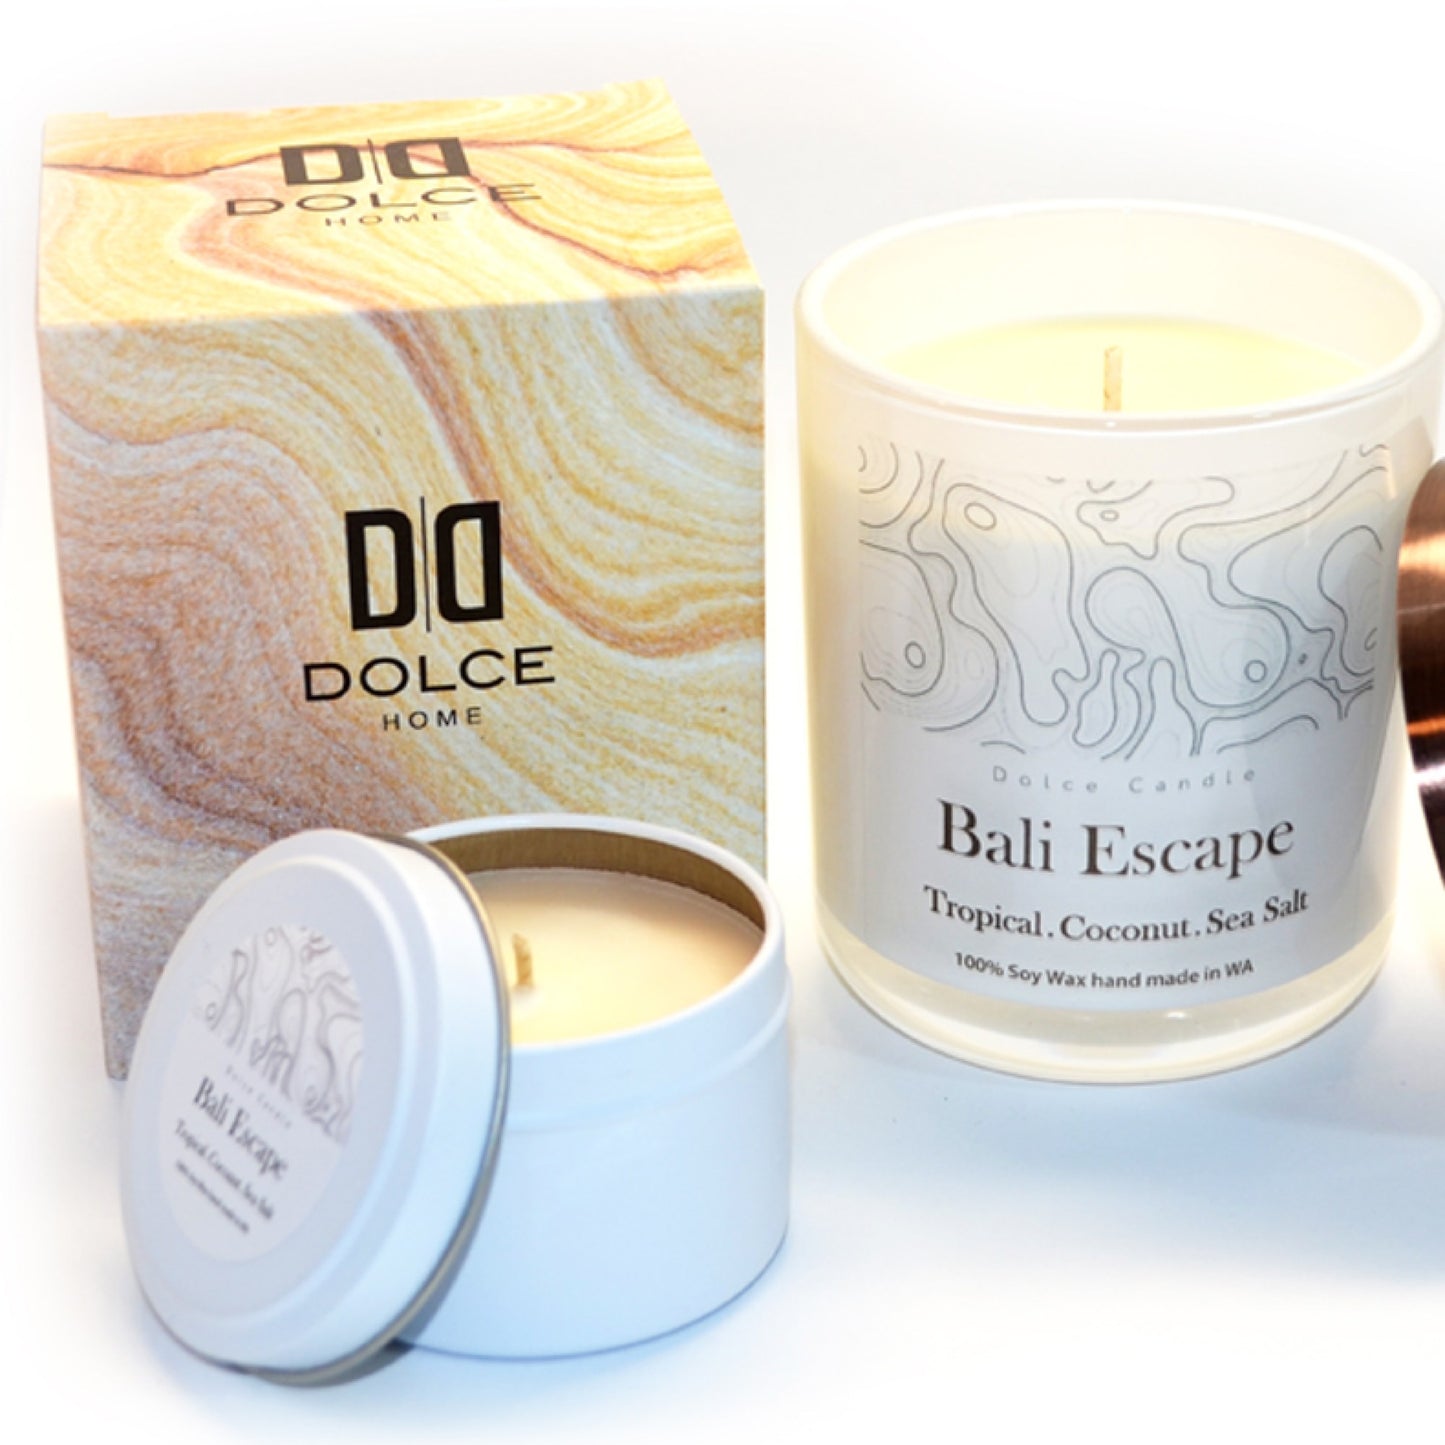 Bali Escape | 300g Soy Wax Candle | Dolce Home | Handmade in W.A.